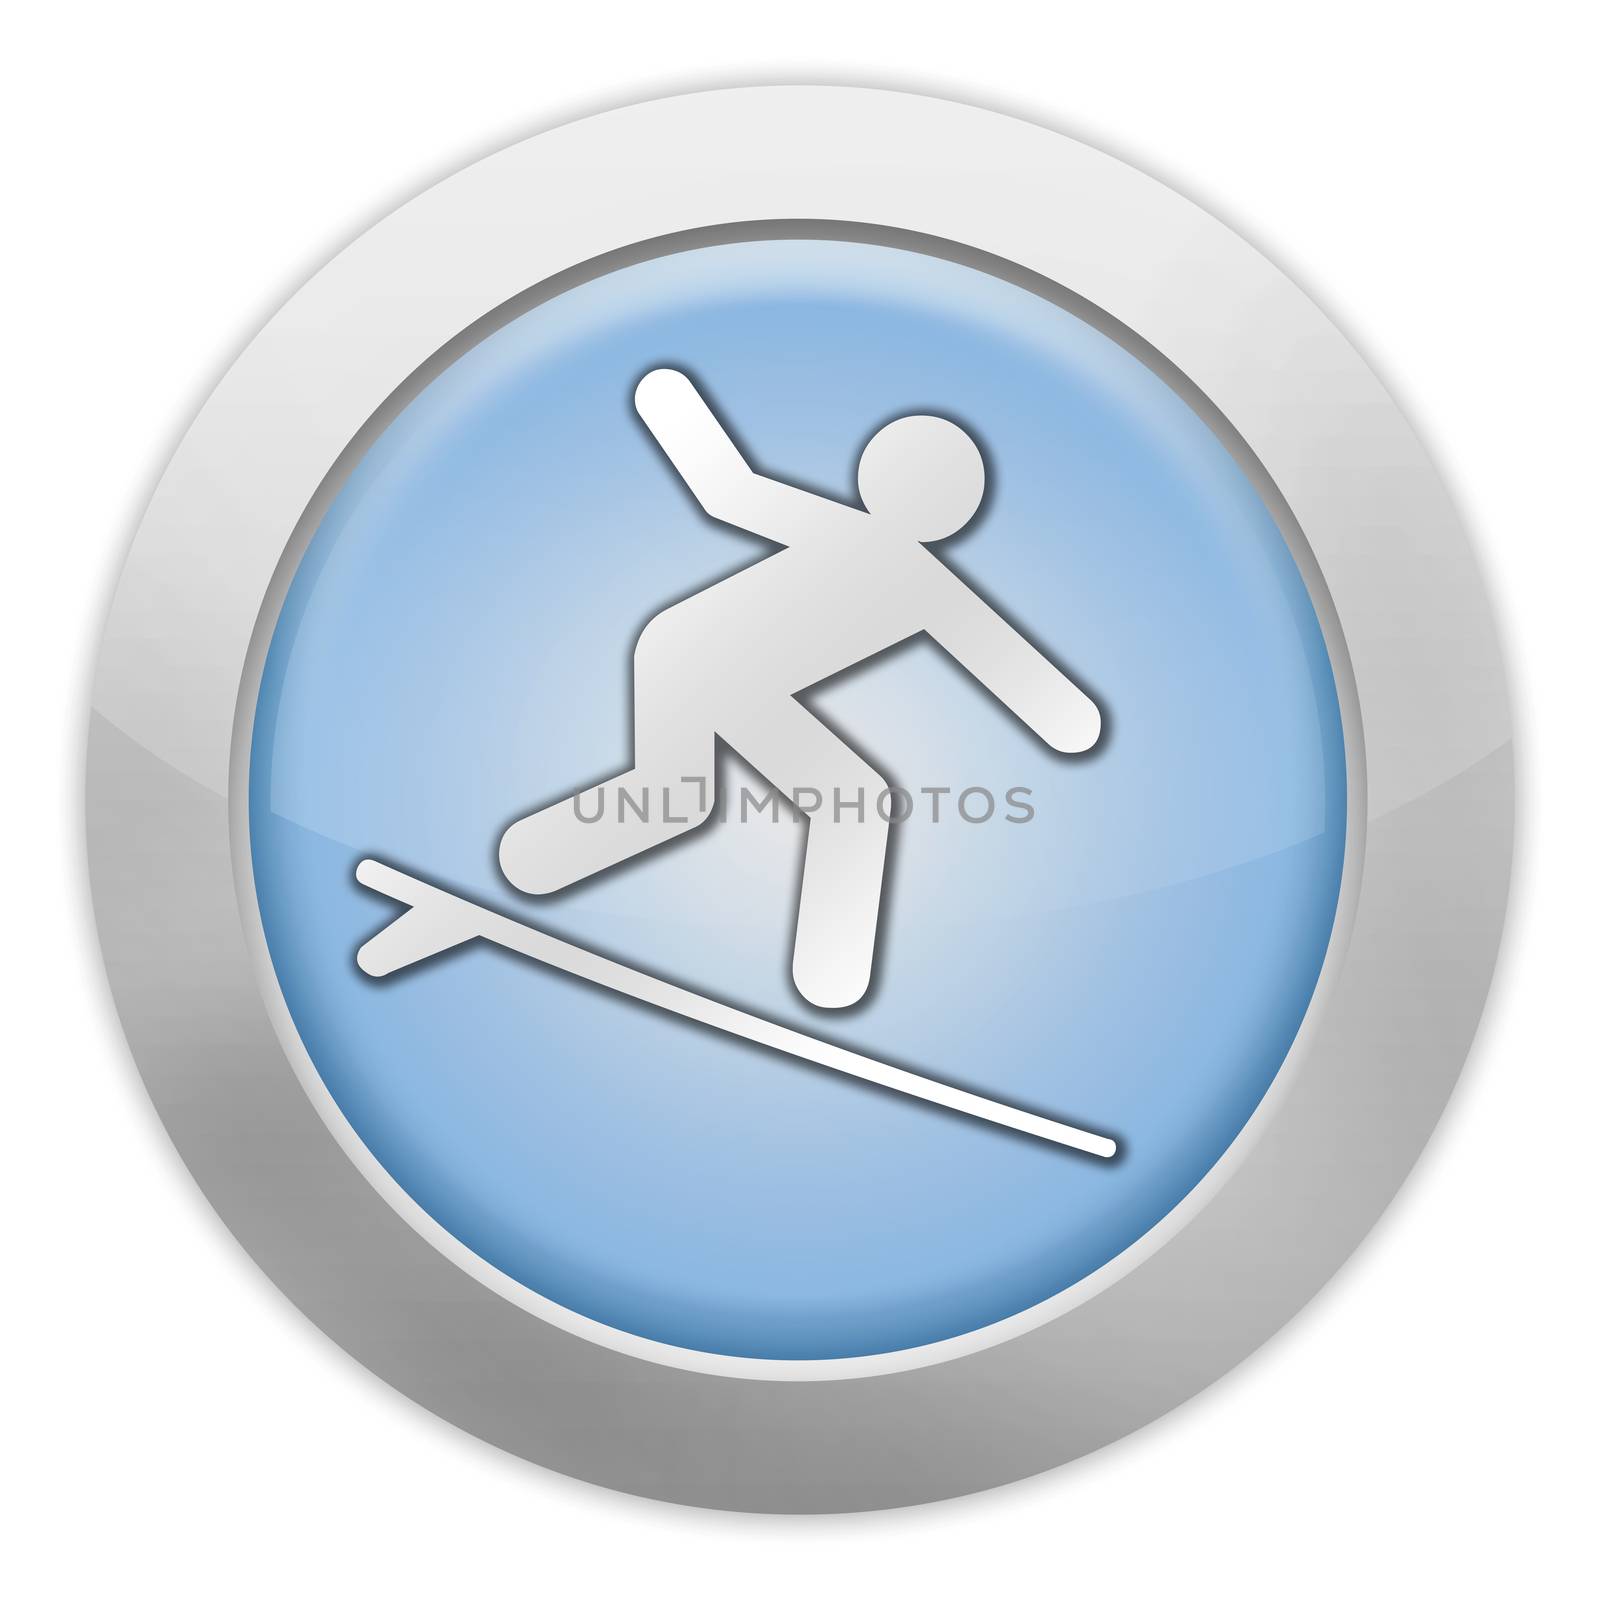 Icon, Button, Pictogram Surfing by mindscanner